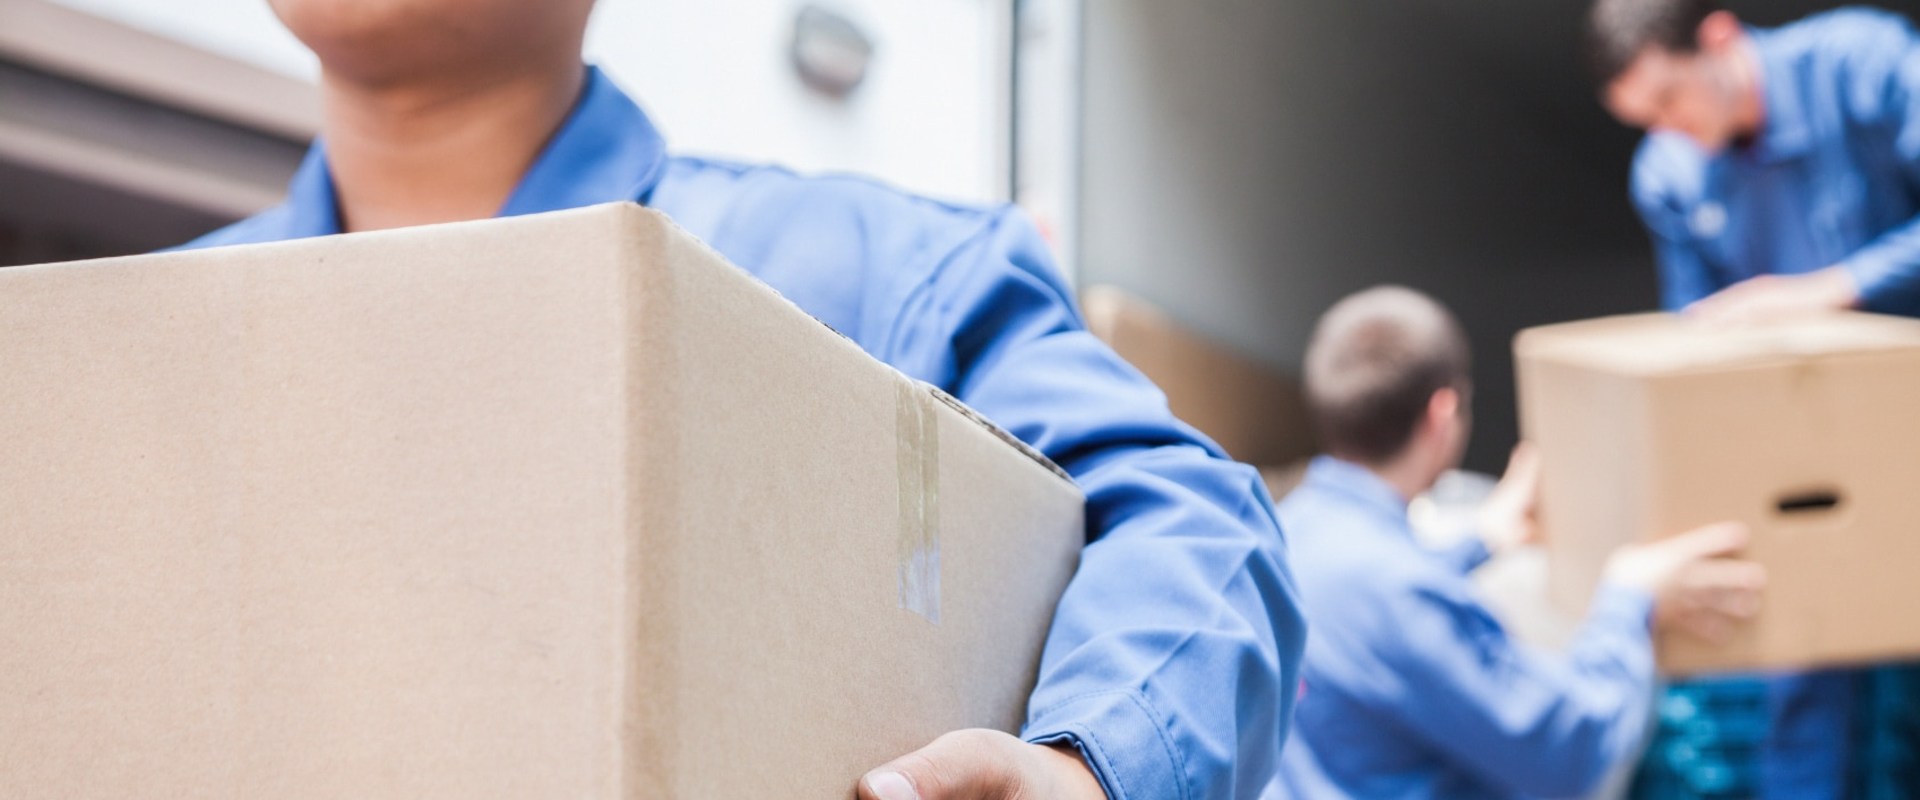 What is the market trend for moving companies?